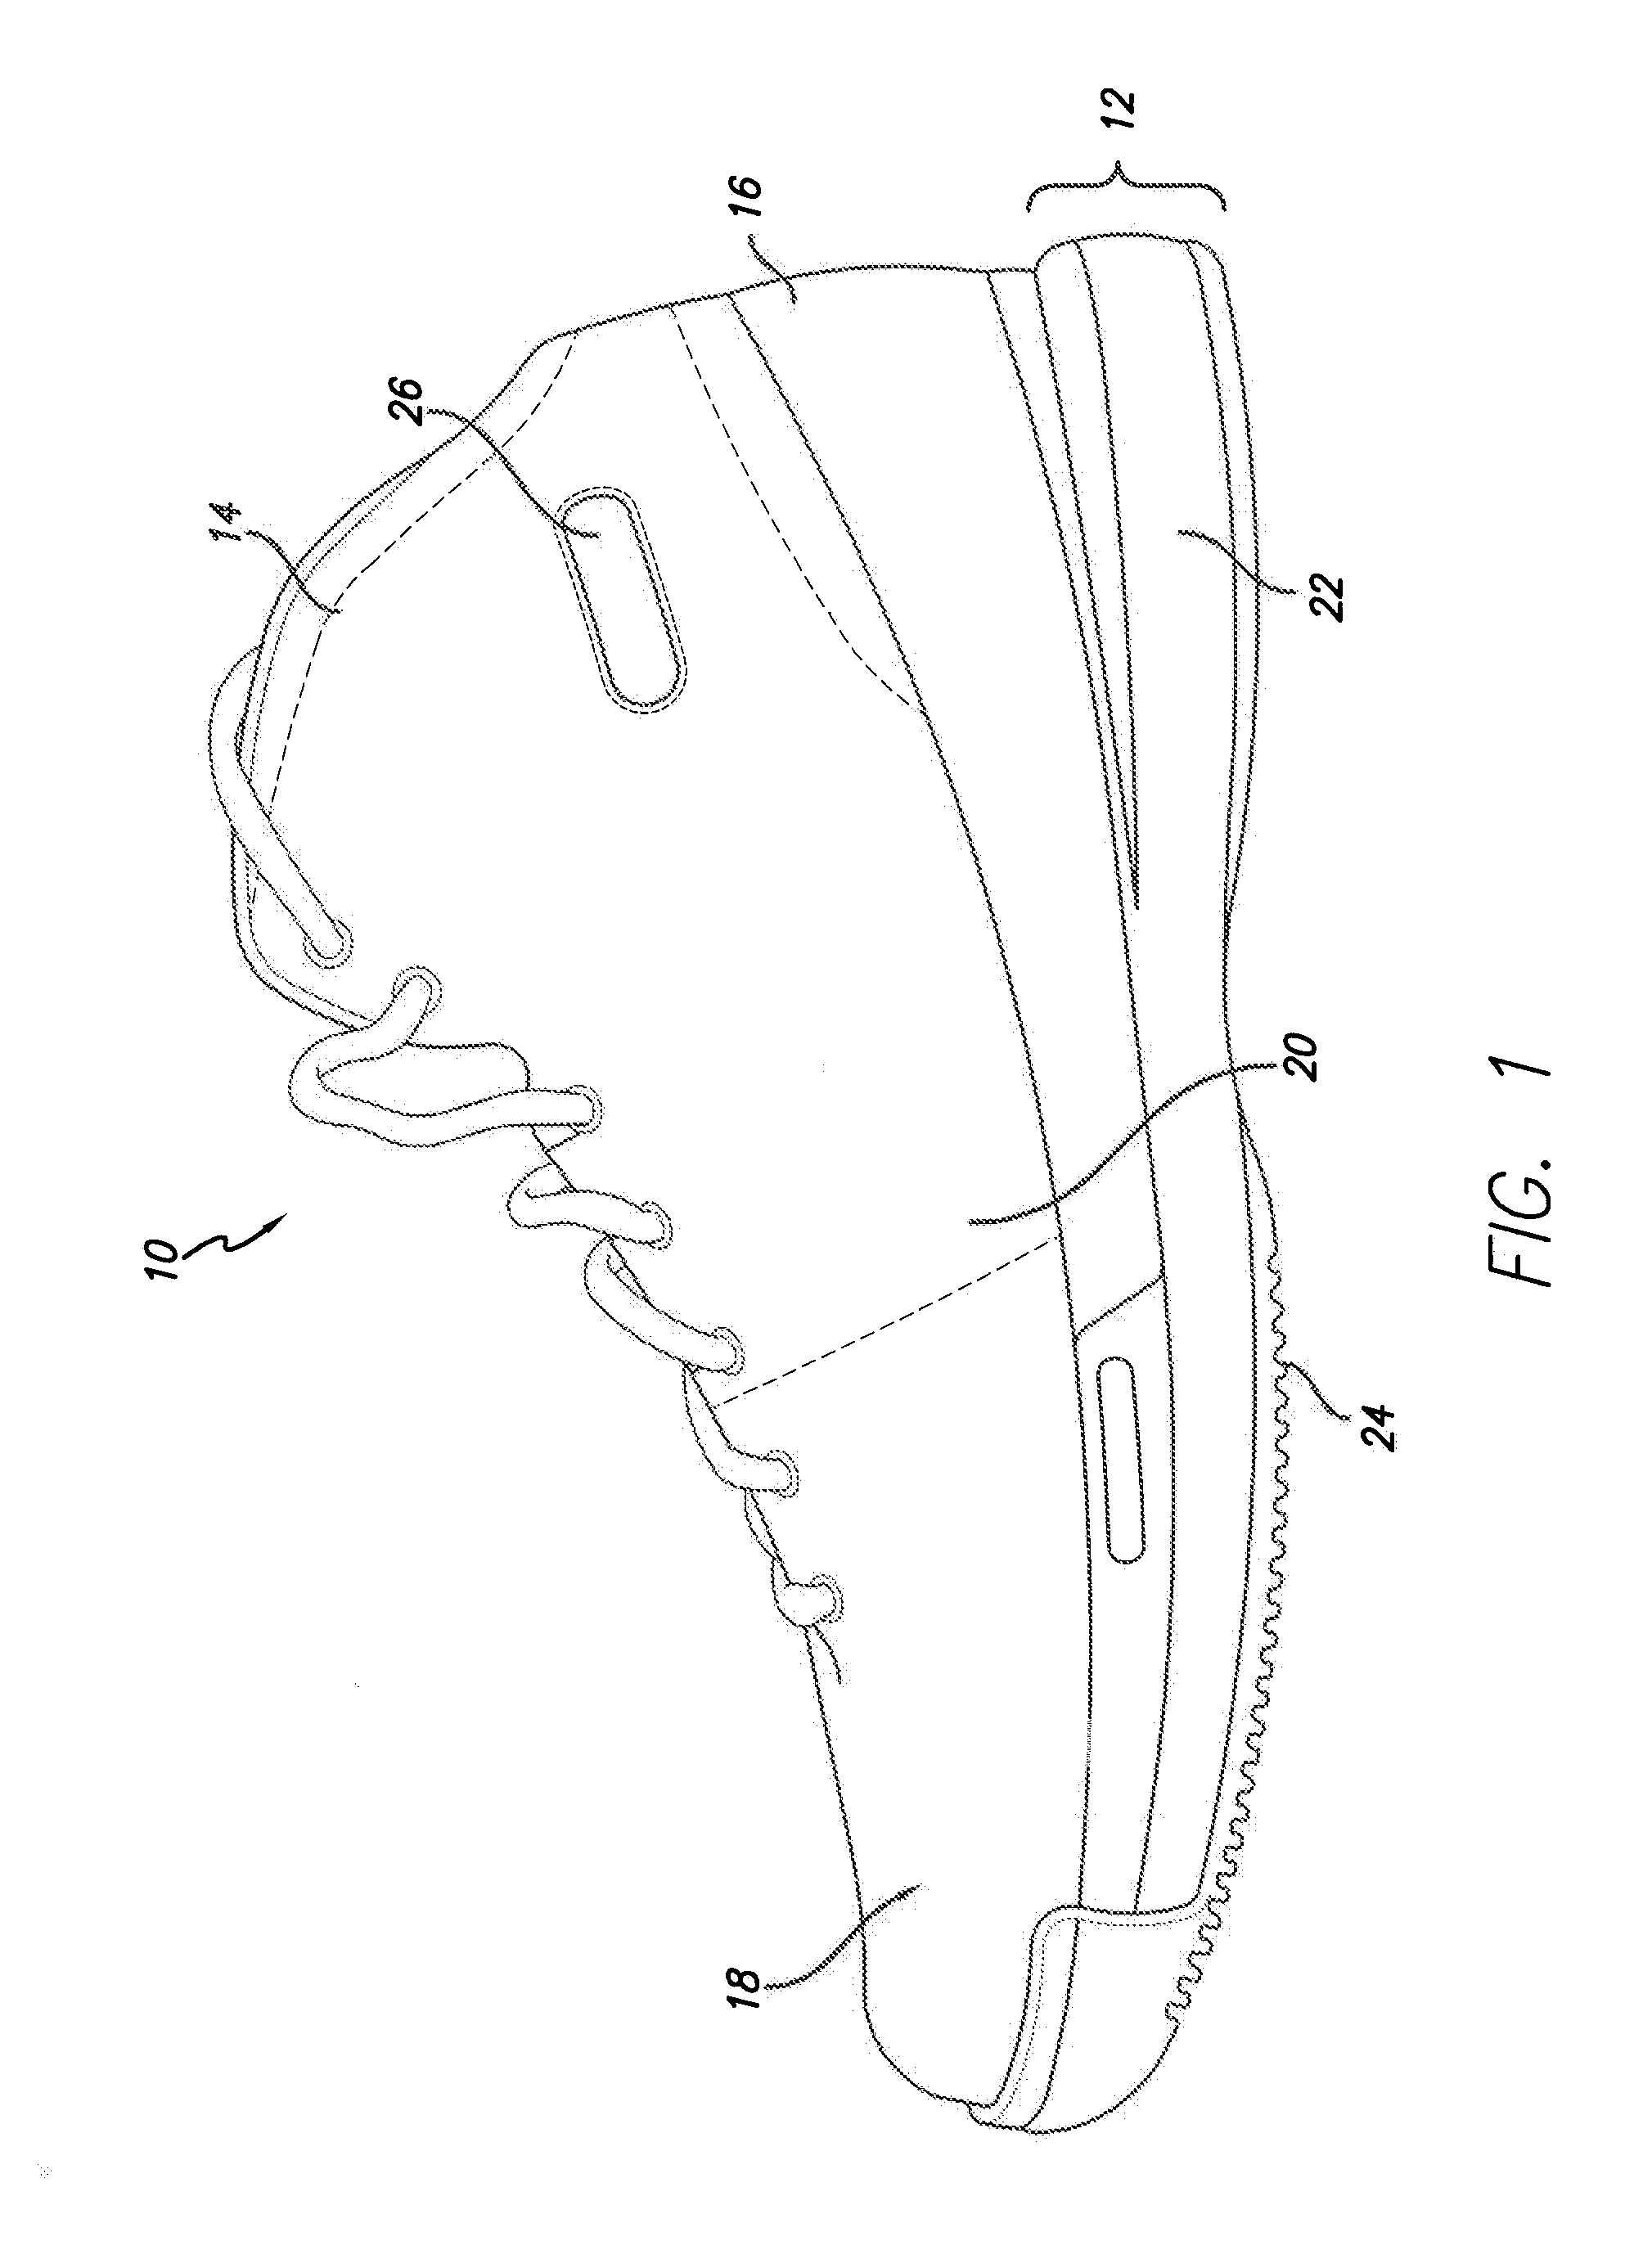 Form-Fitting Articles and Method for Customizing Articles to be Form-Fitted